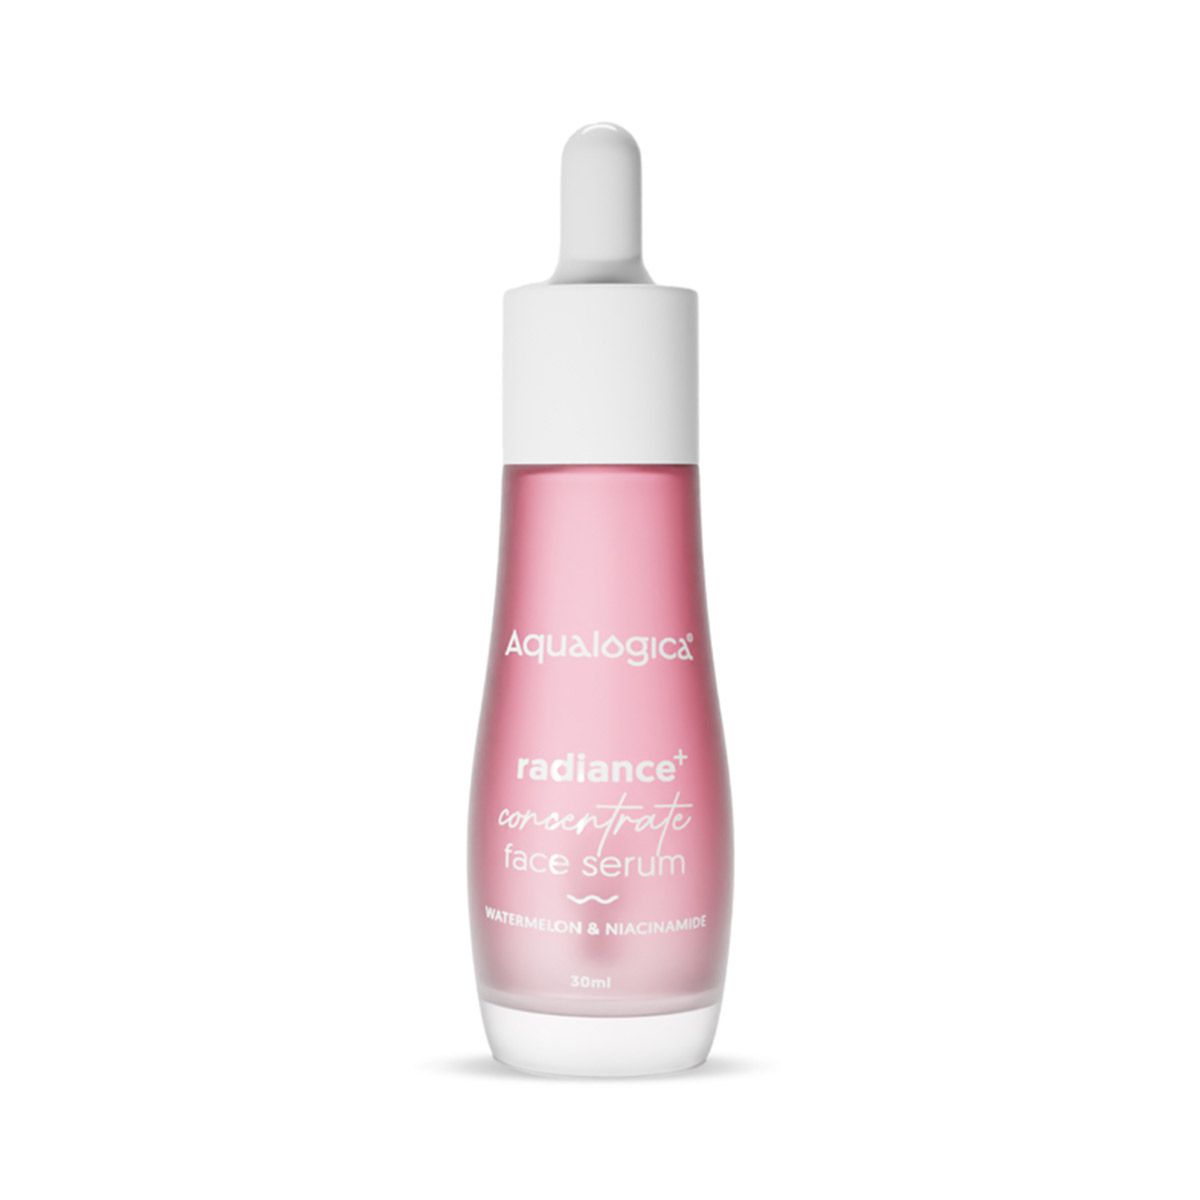 FREEBIE_Radiance+ Concentrate Face Serum 30 ml